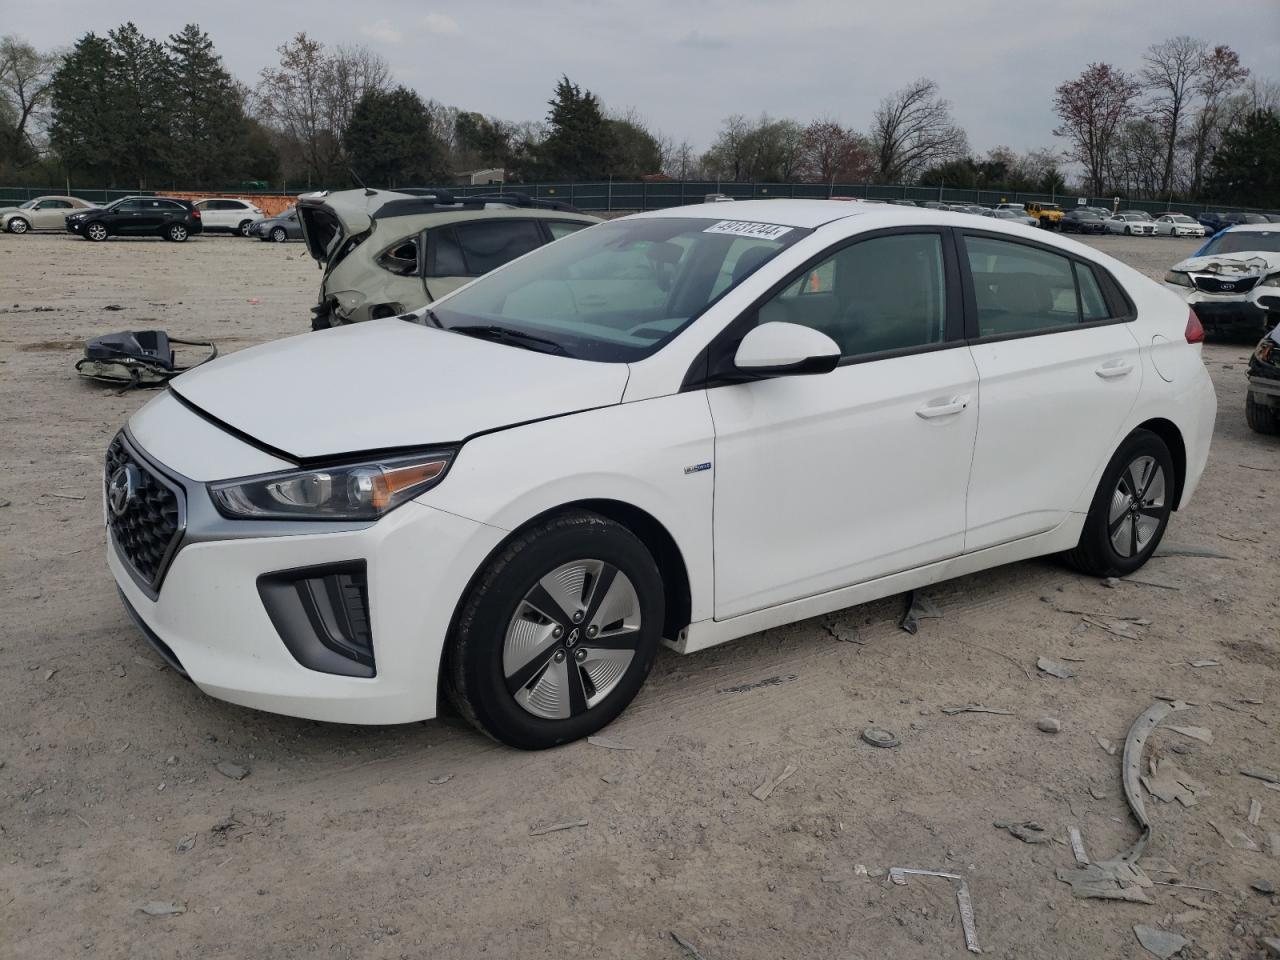 vin: KMHC65LC5LU212688 KMHC65LC5LU212688 2020 hyundai ioniq 1600 for Sale in 37354 6763, Tn - Knoxville, Madisonville, Tennessee, USA